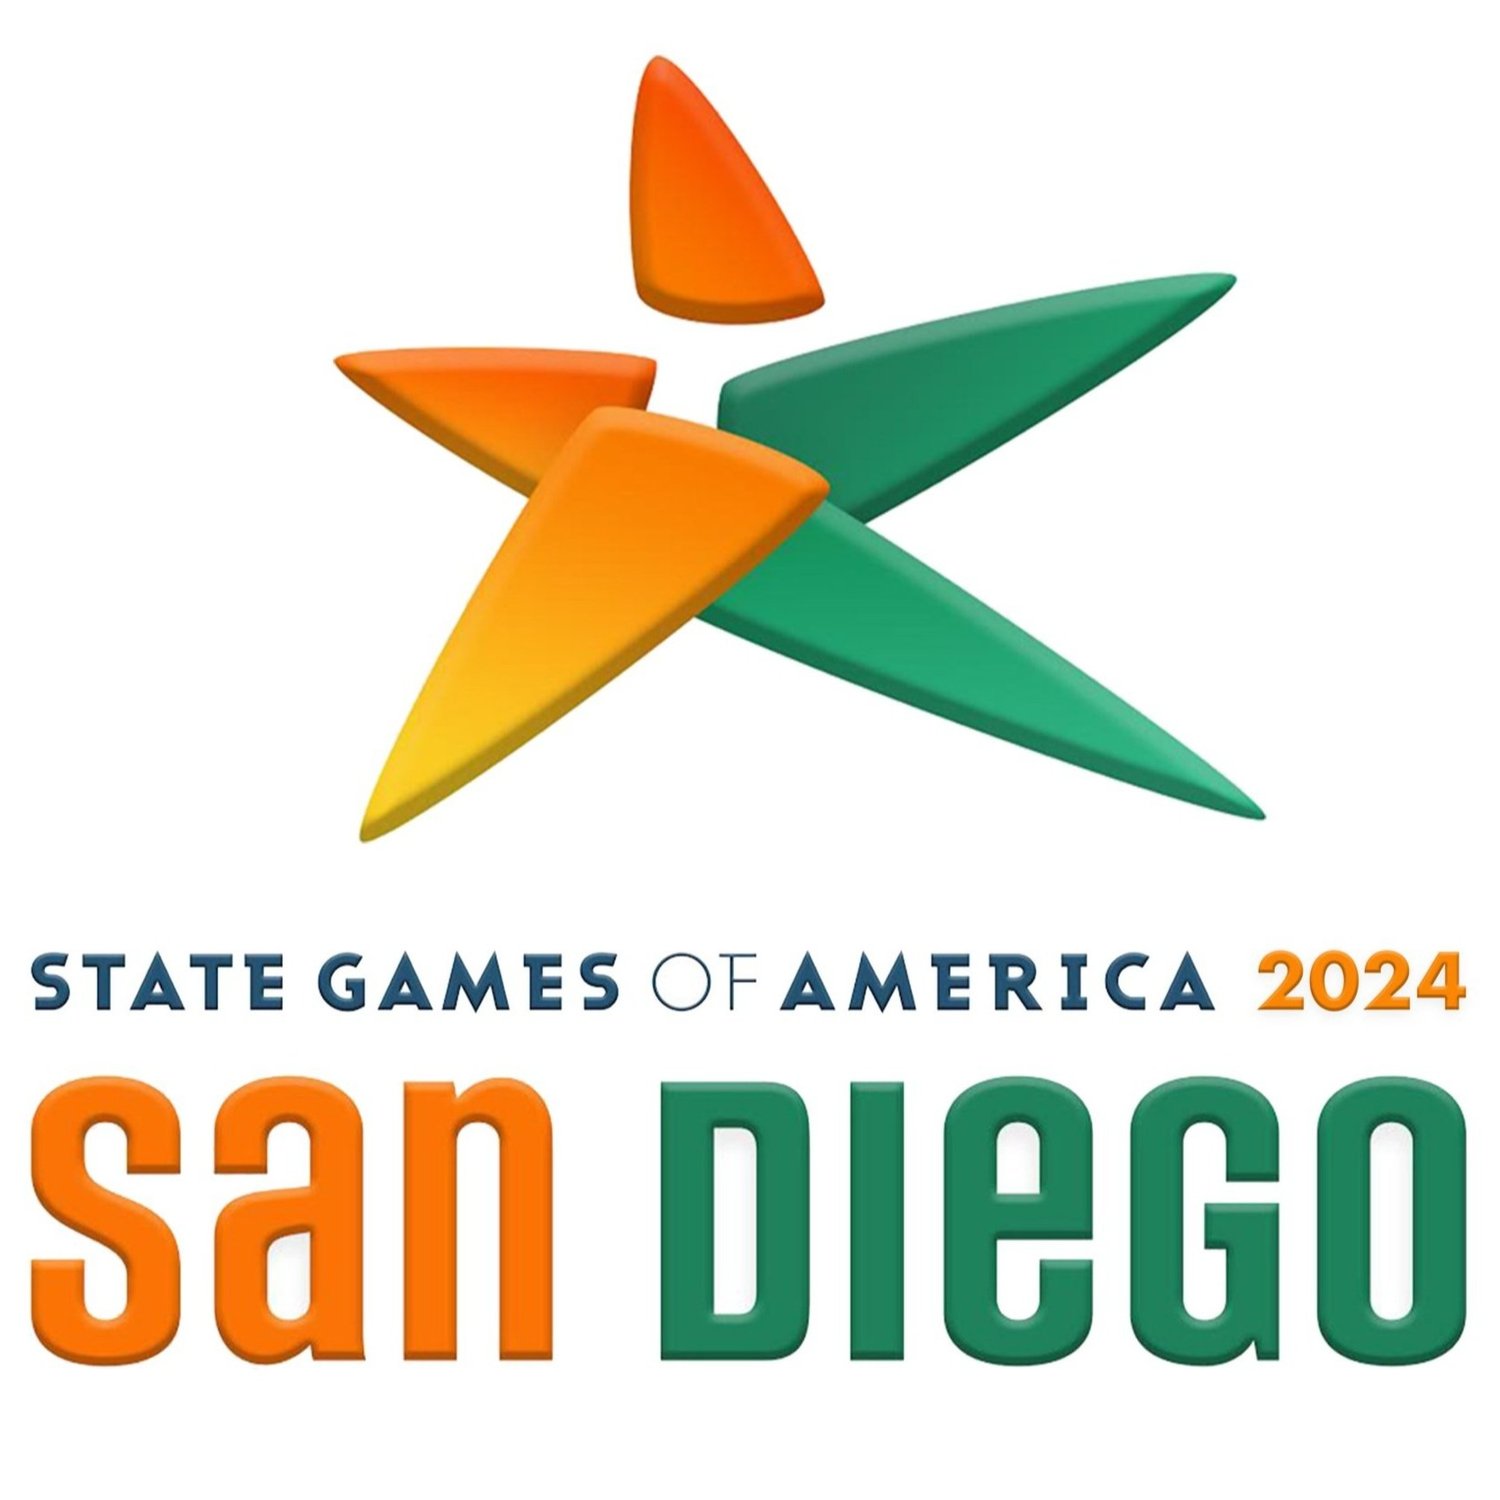 State Games of America